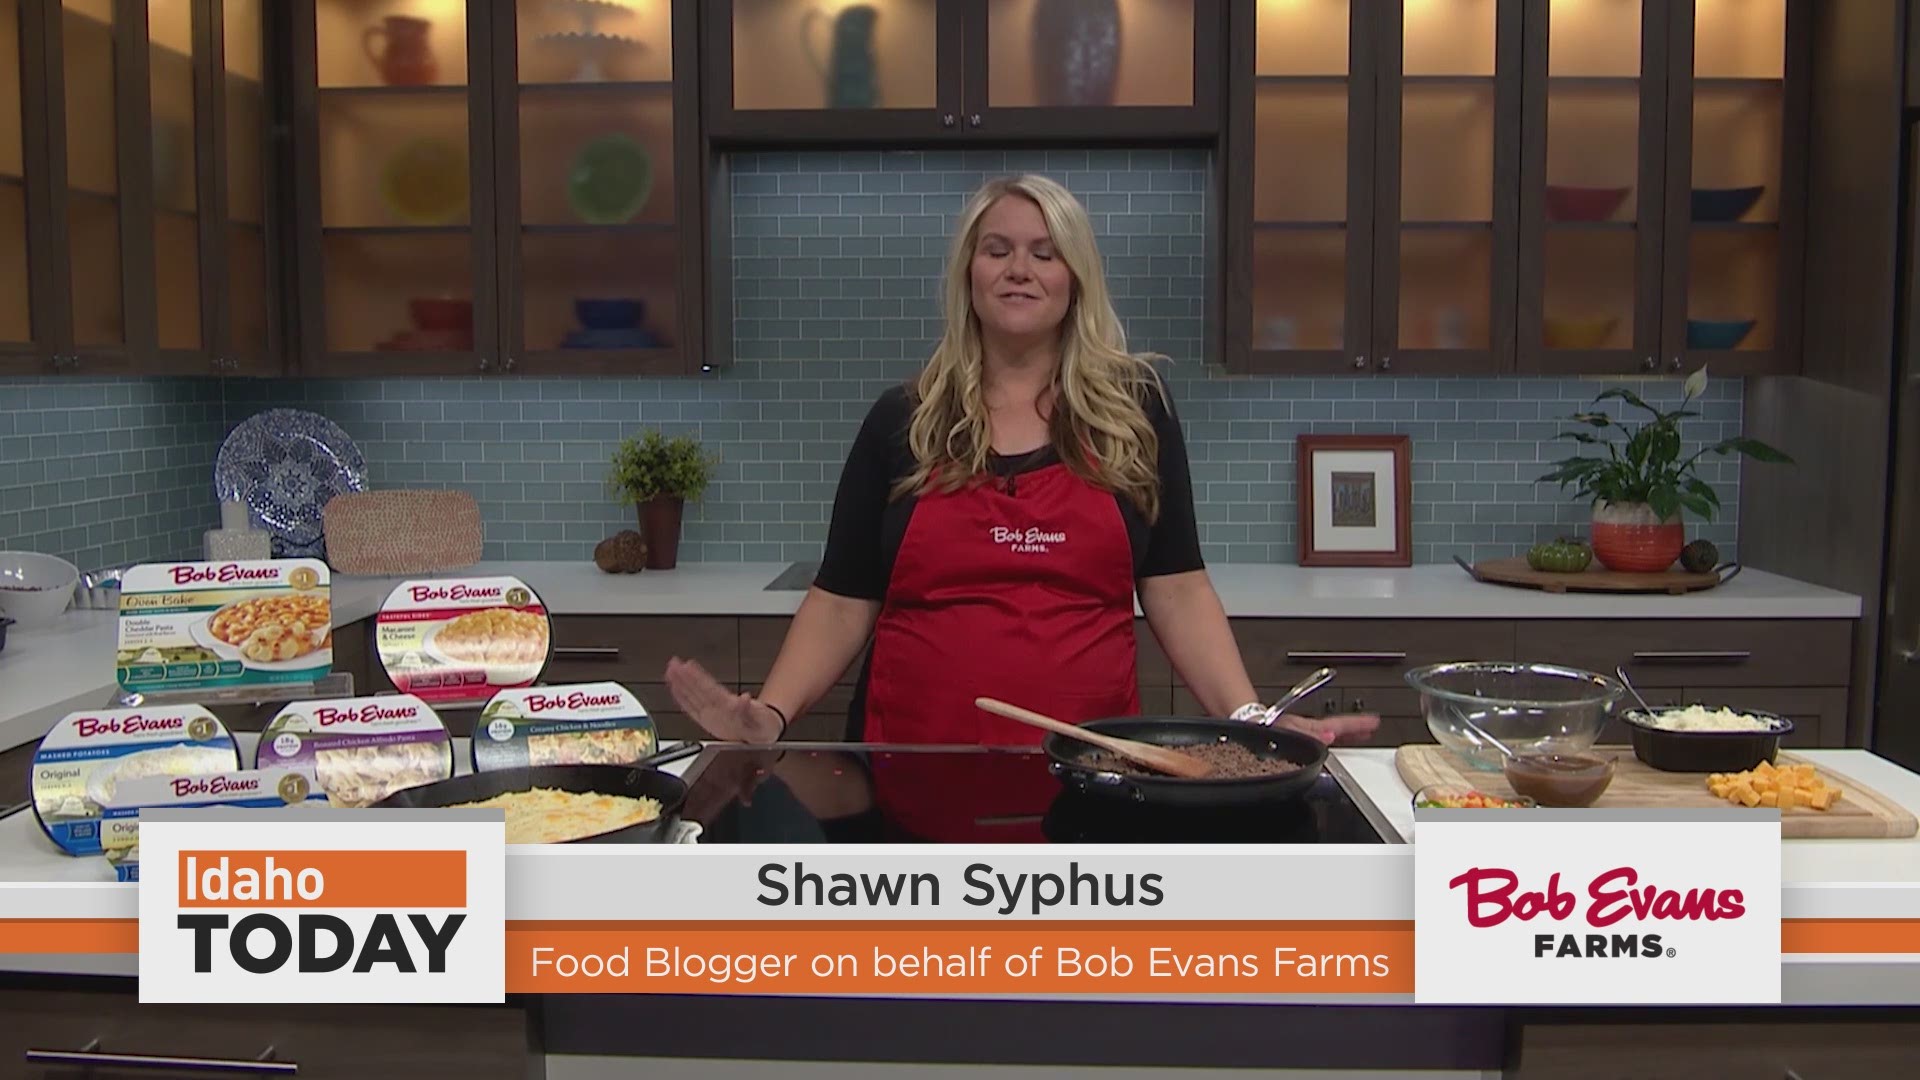 Bob Evans feature on Idaho Today! Follow along with the recipe here: https://www.bobevansgrocery.com/recipes/bob-evans-shepherds-pie-skillet/#recipe-ingredients